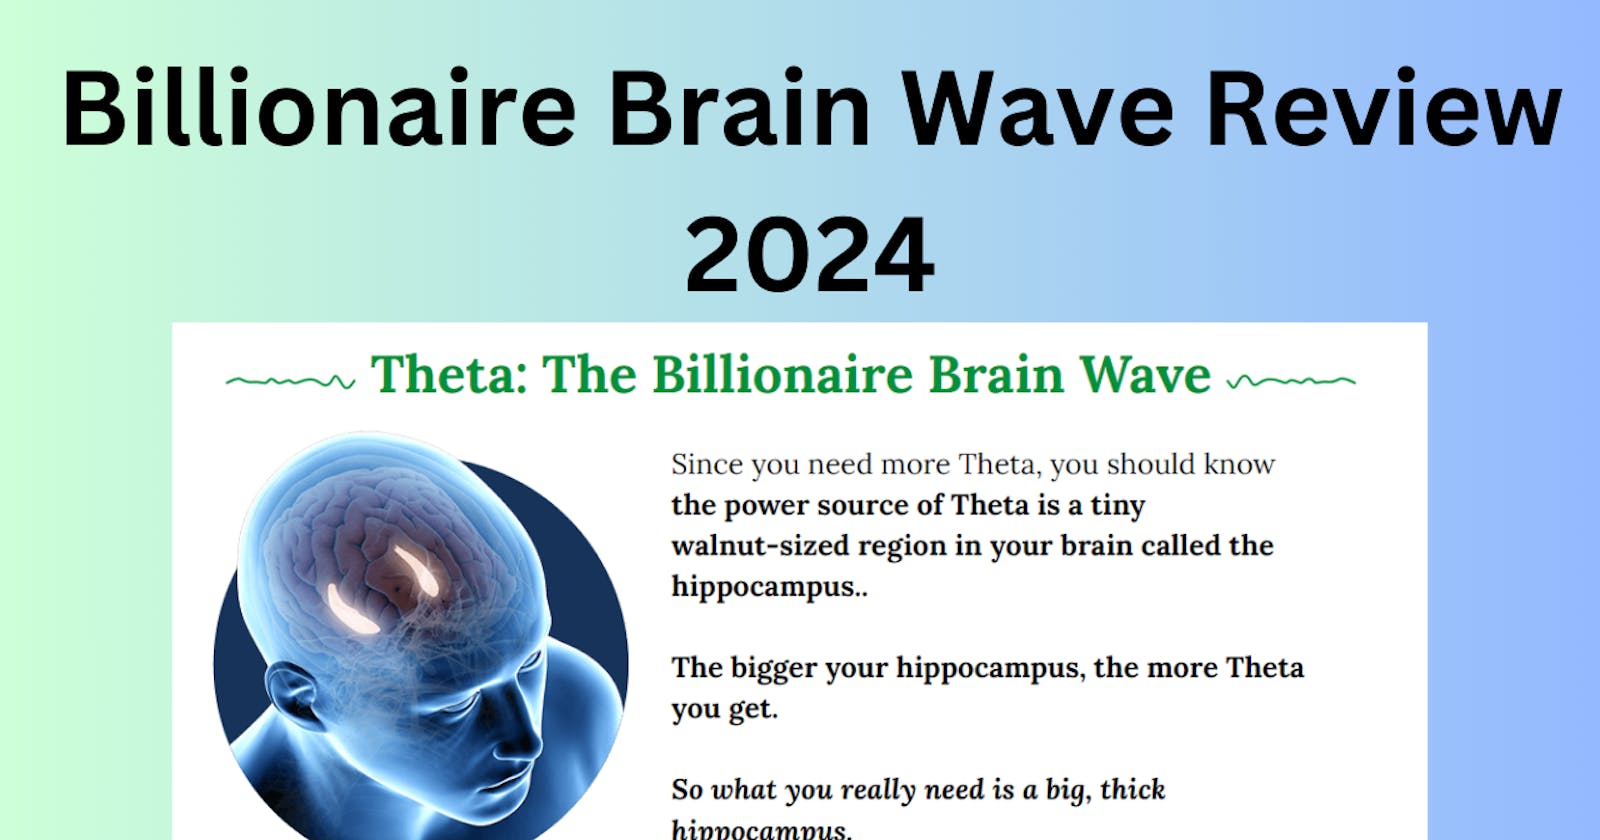 What Are The Benefits Of Billionaire Brain Wave Reviews?